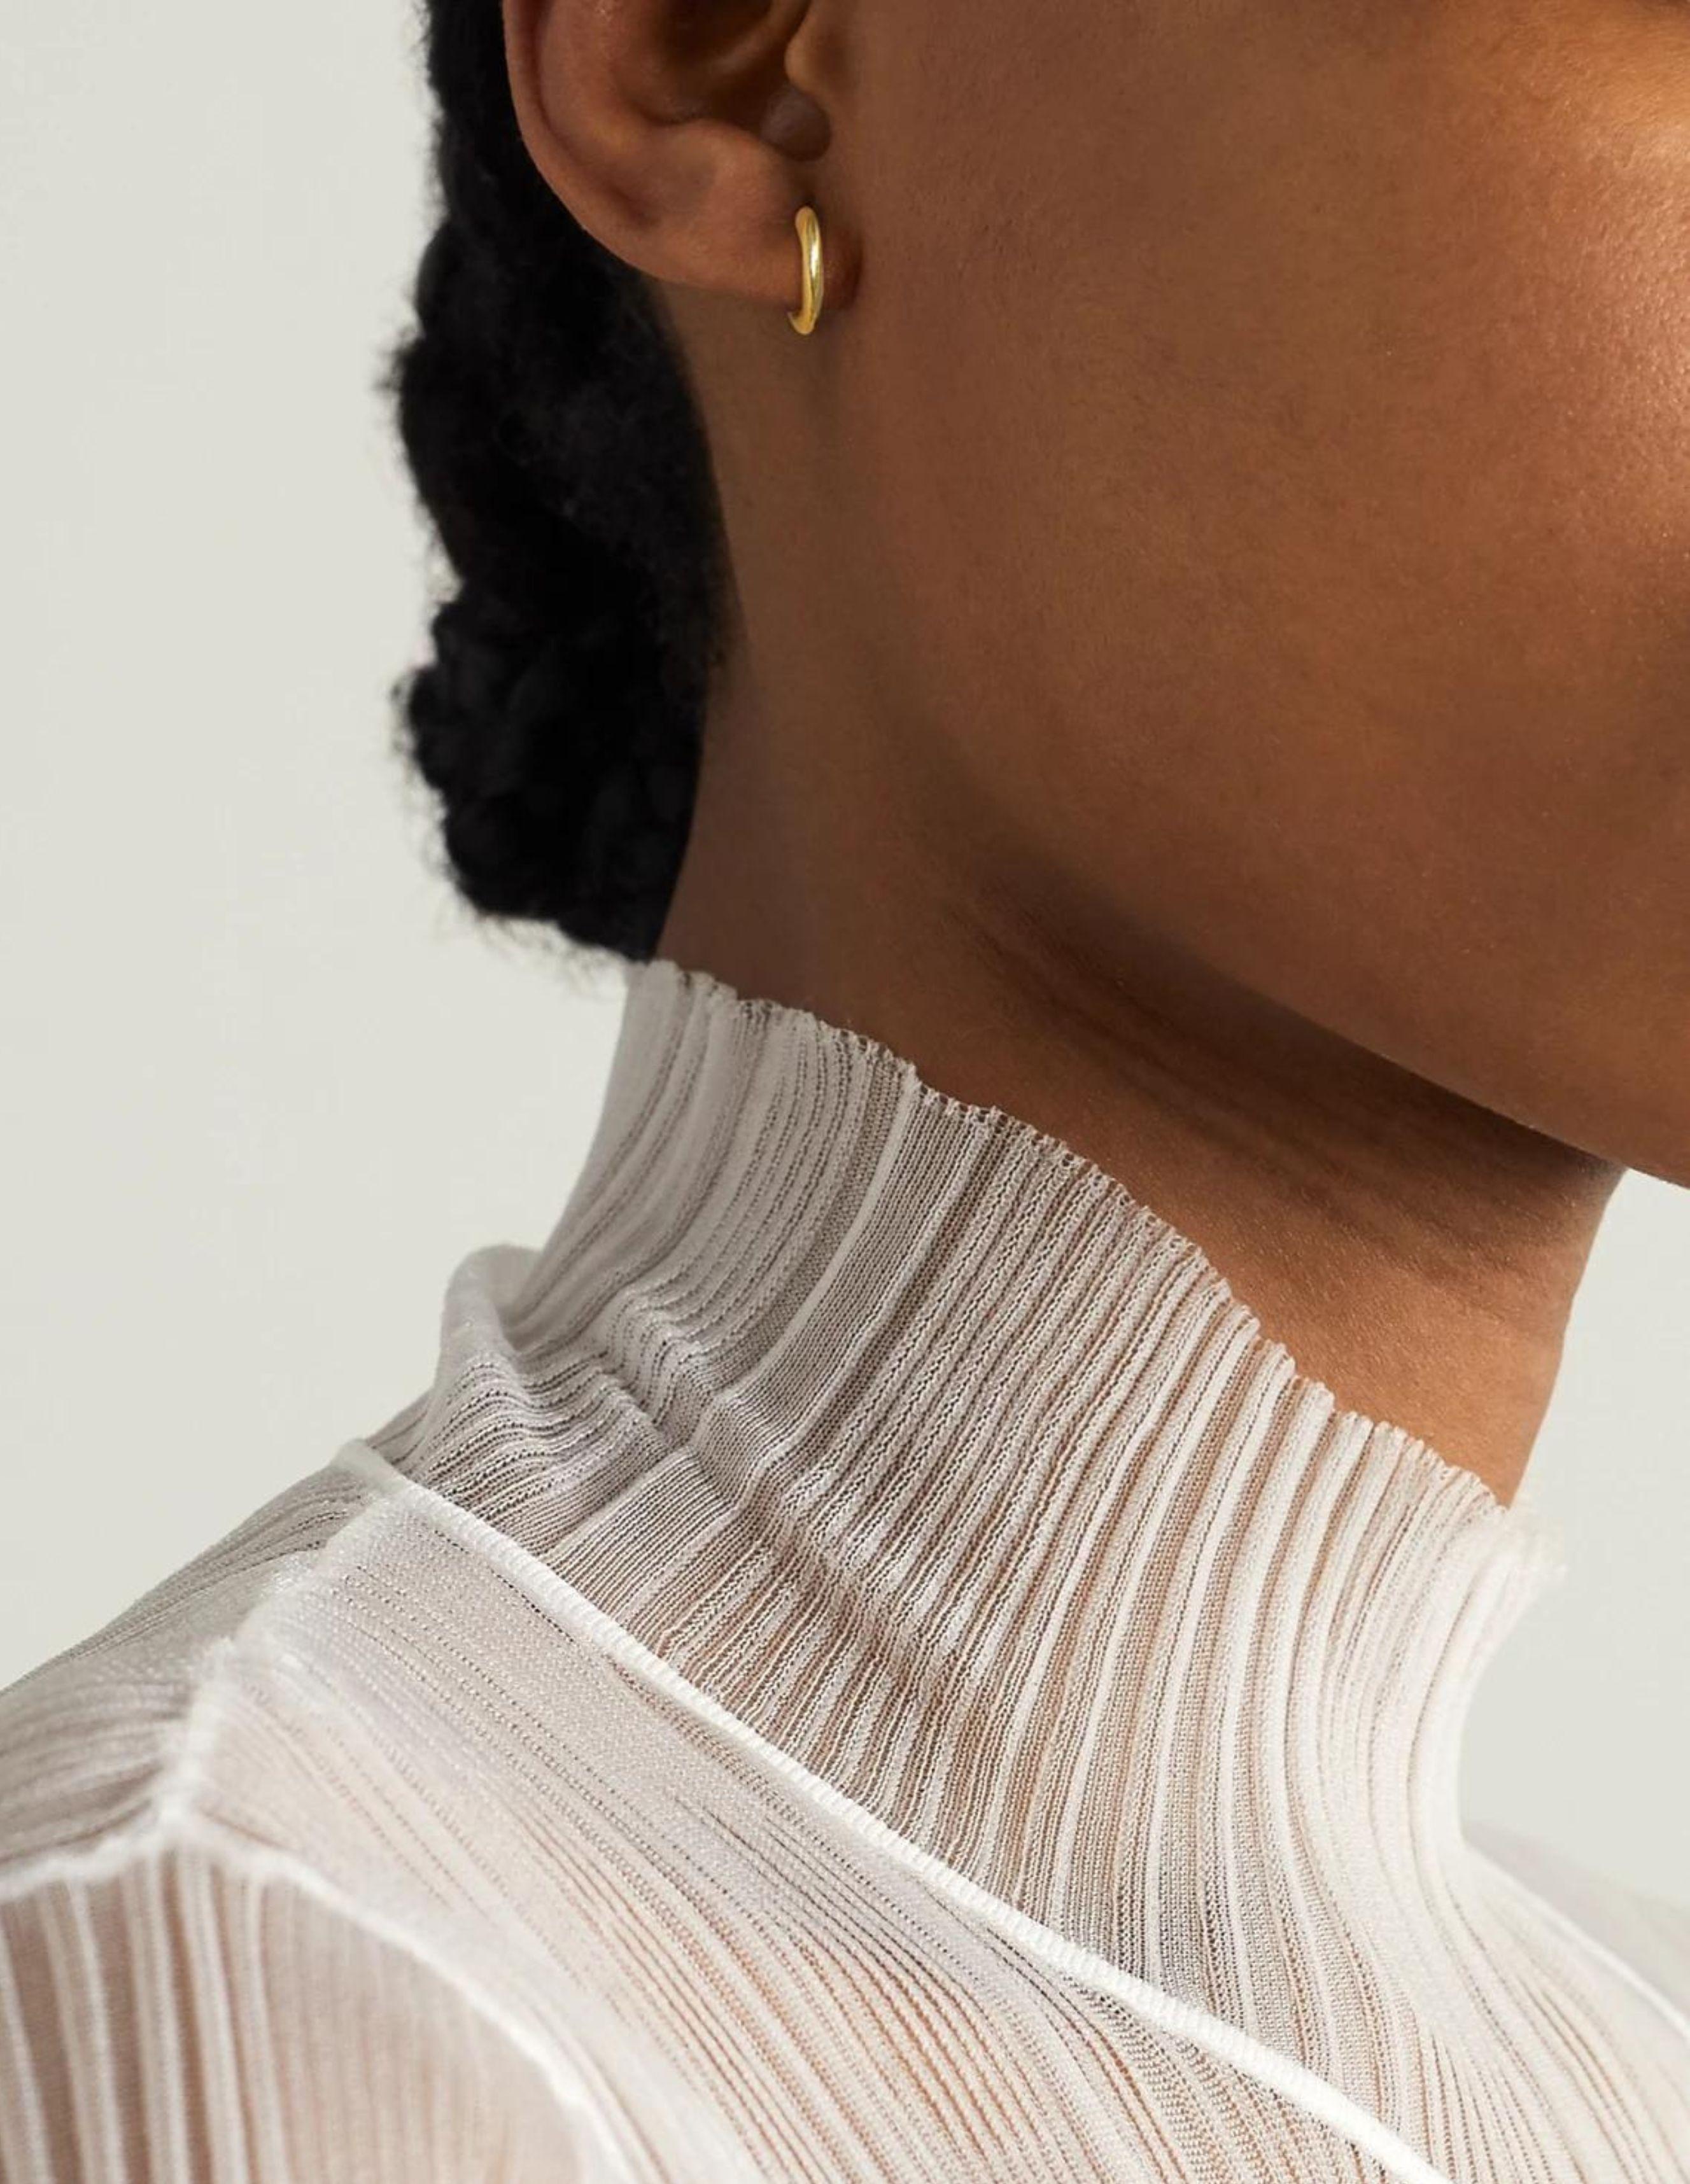 KHIRY Signature Khartoum Silhouette Hoops inspired by long horned cattle that are a store of value and wealth in Sudan. Polished and minimal with sculptural allure. 0.5 inch drop with butterfly fastening for pierced ears.


This item is produced